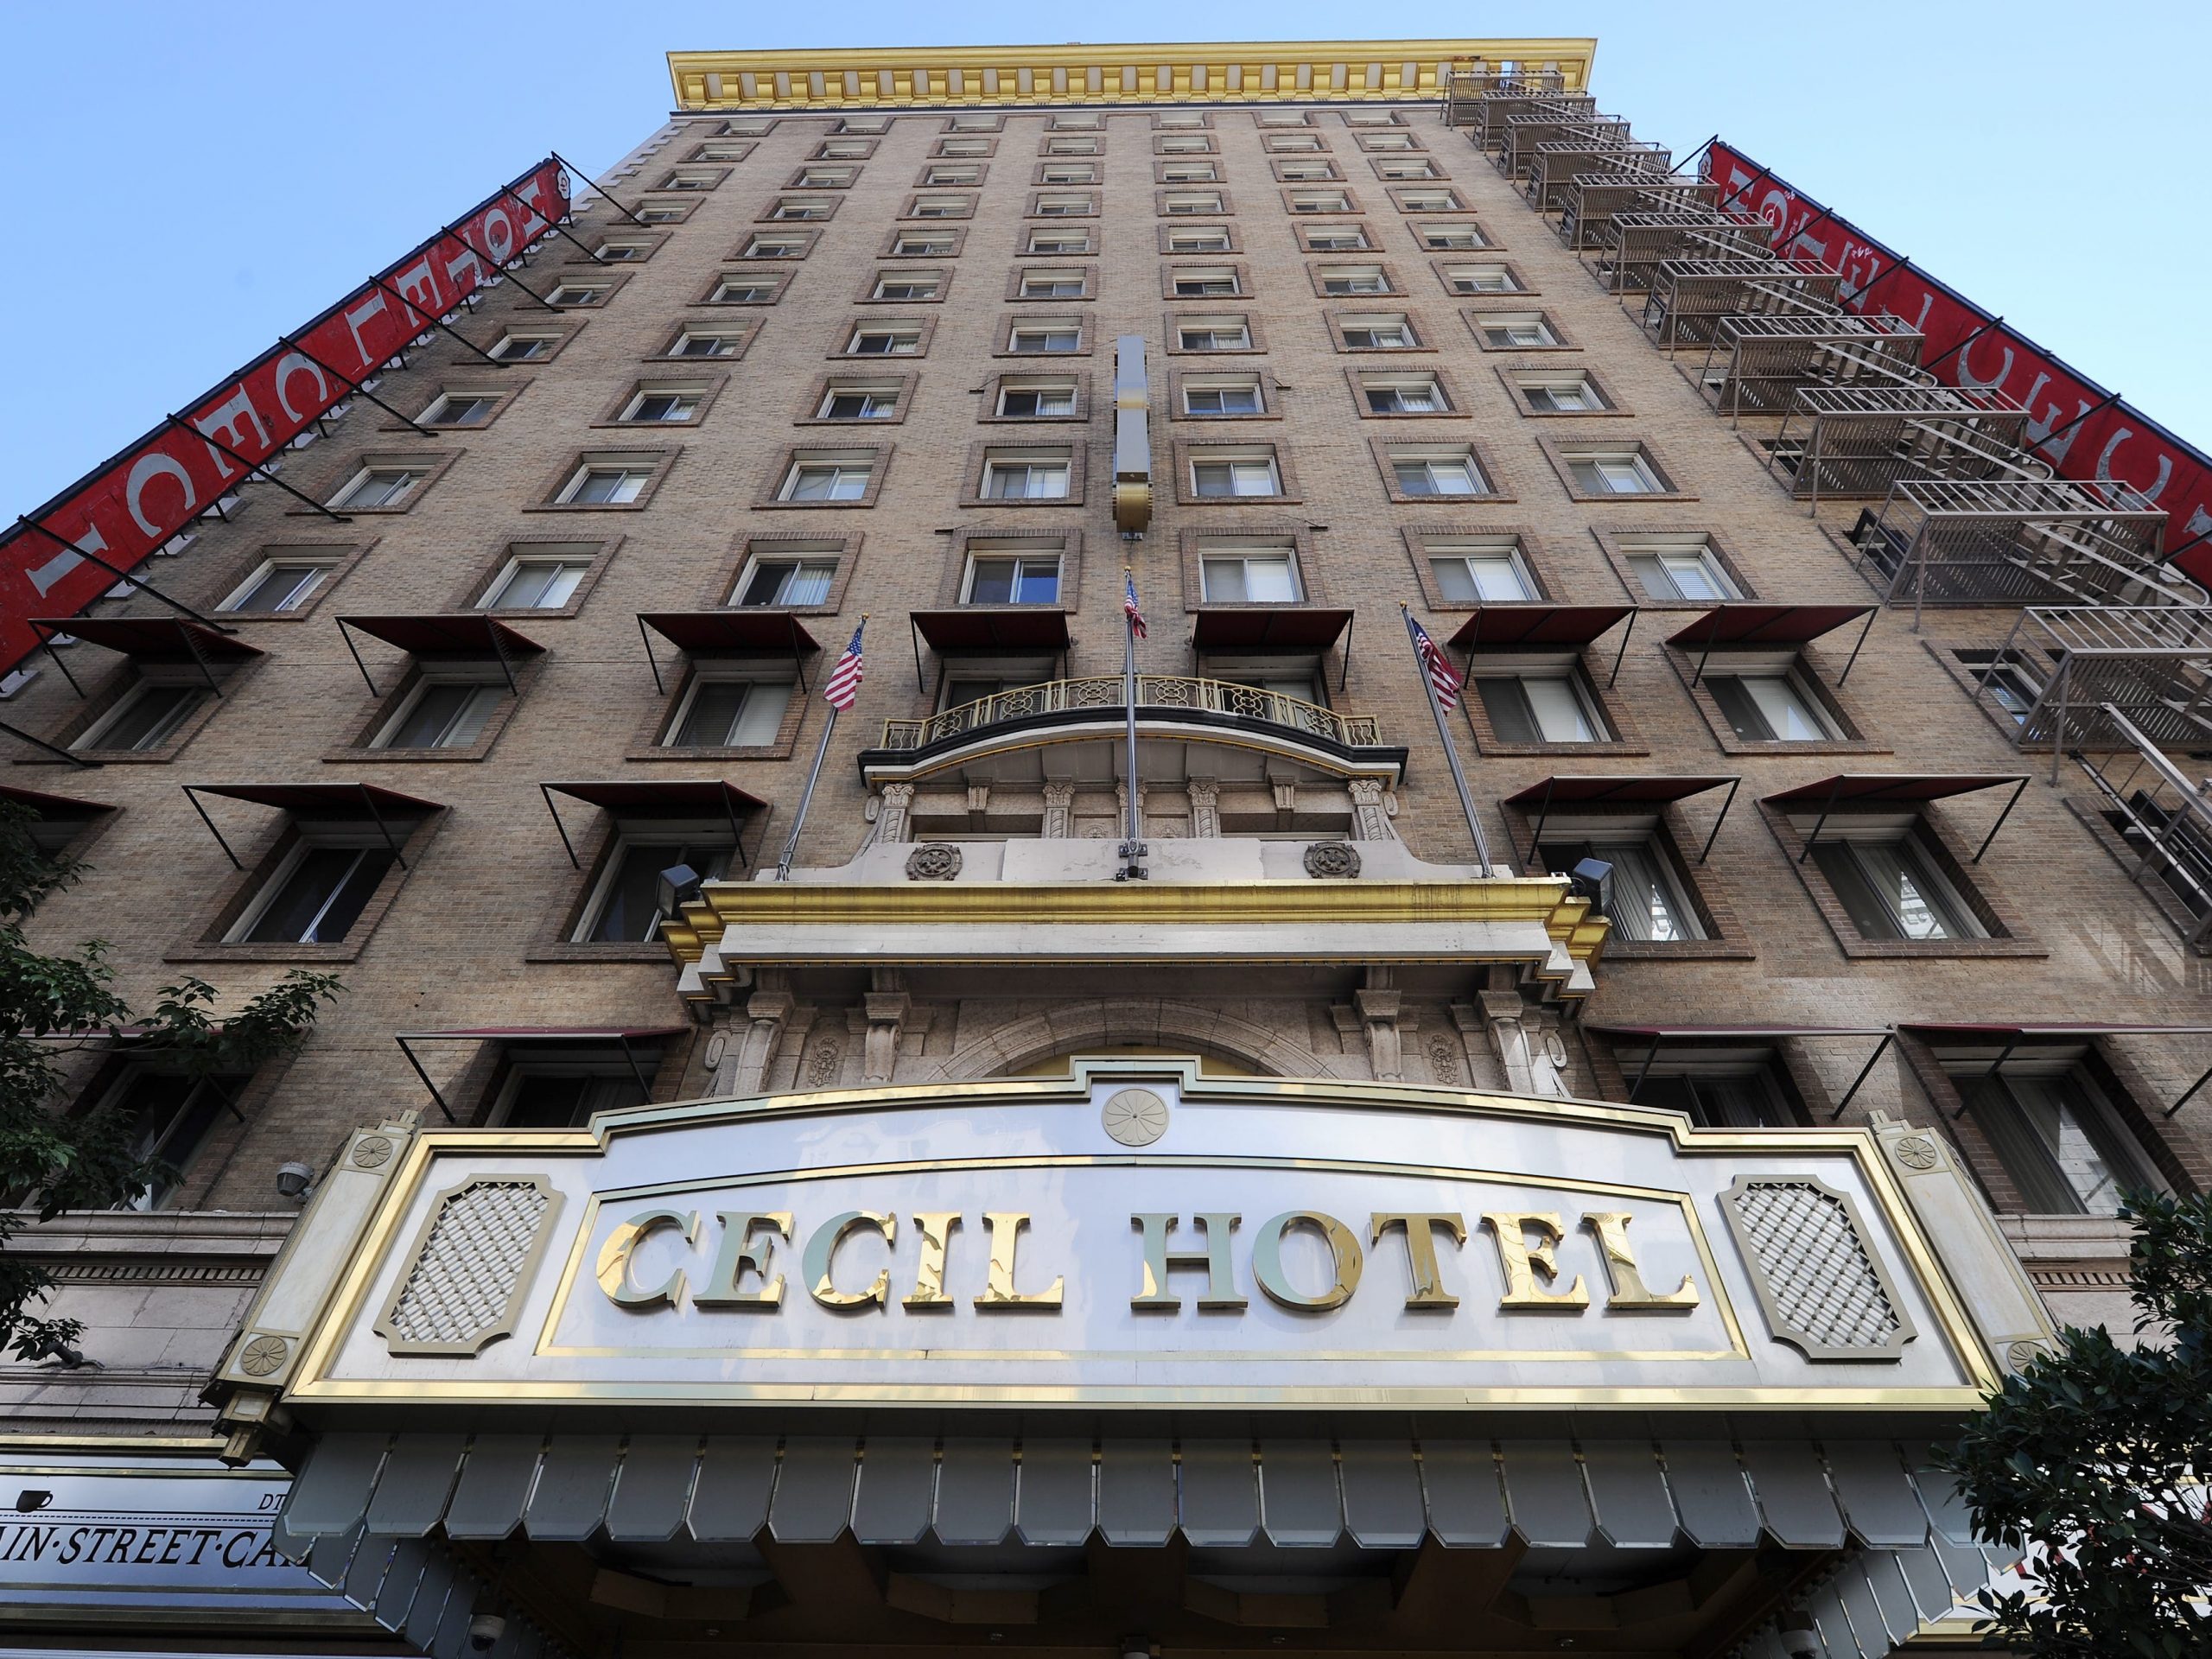 9 chilling facts about the Cecil Hotel, an infamous Los Angeles